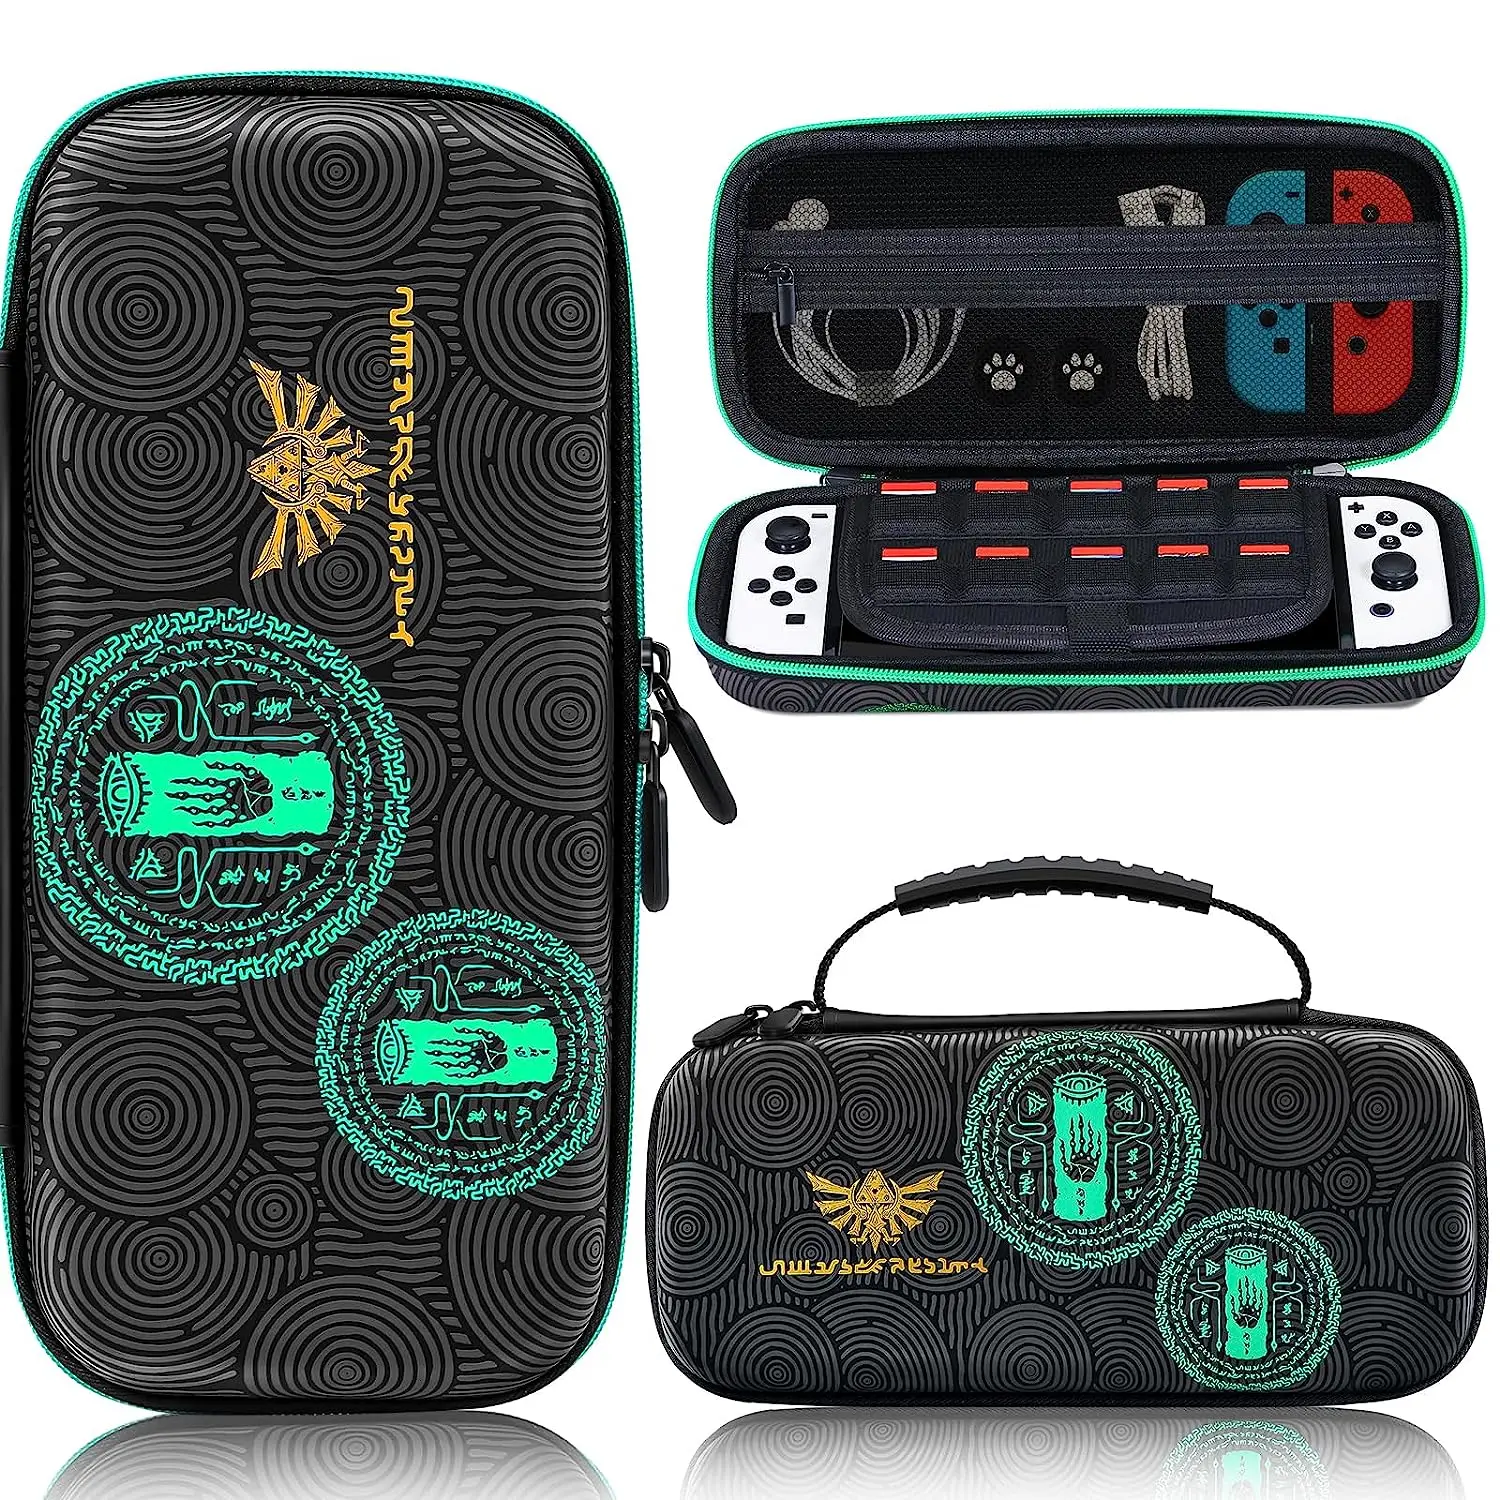 

Carrying Case Compatible with Nintendo Switch/Switch OLED Portable Travel Case Hard Shell Pouch Game Bag for Switch Accessories